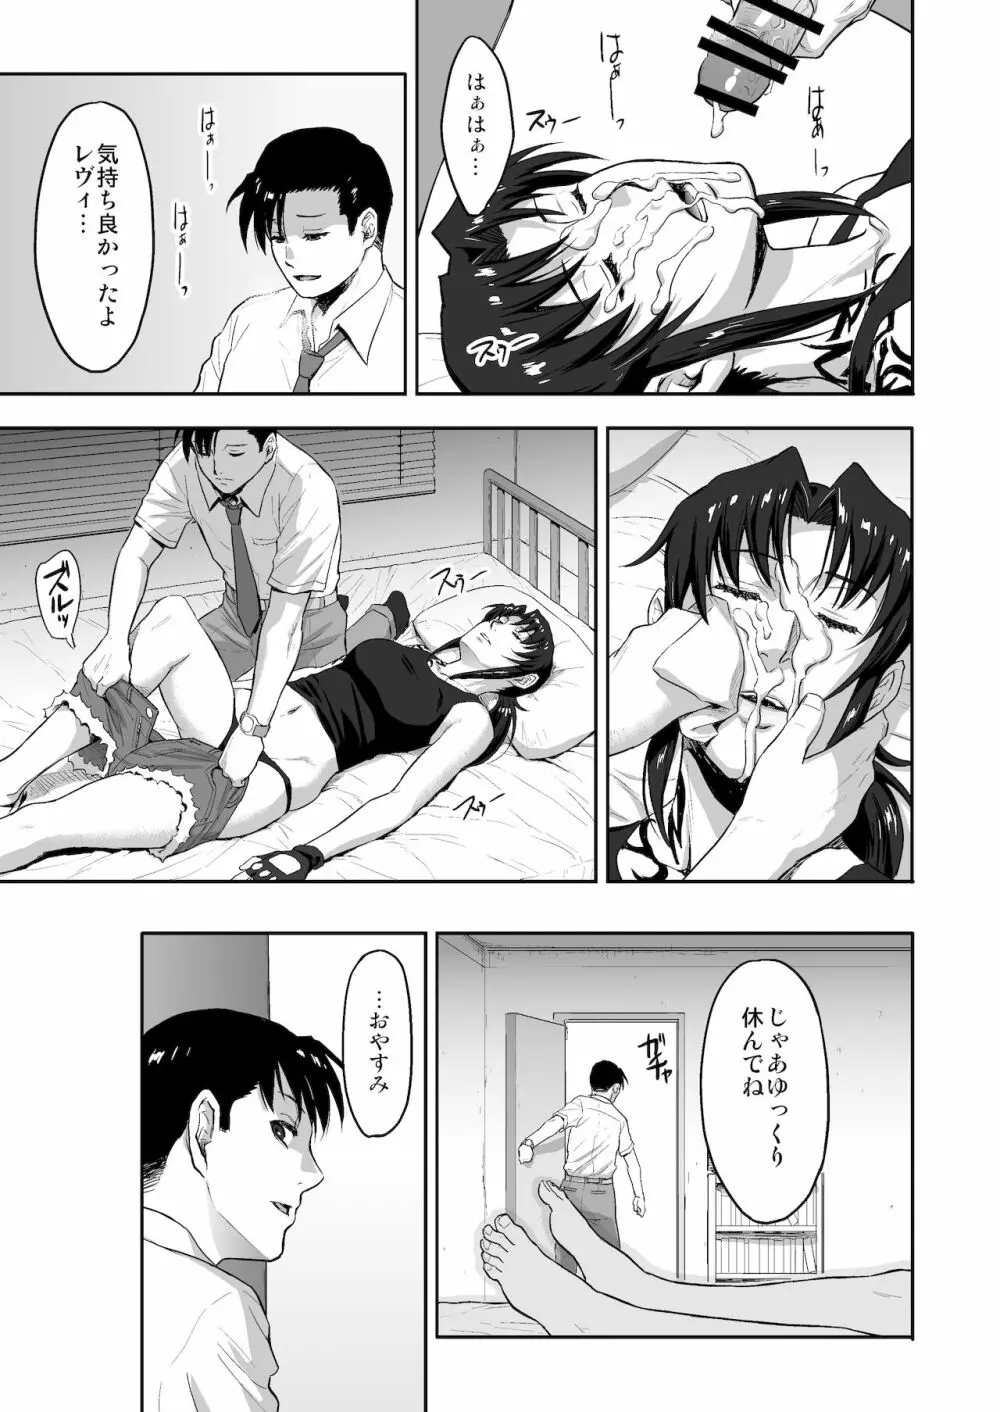 SLEEPING Revy - page22